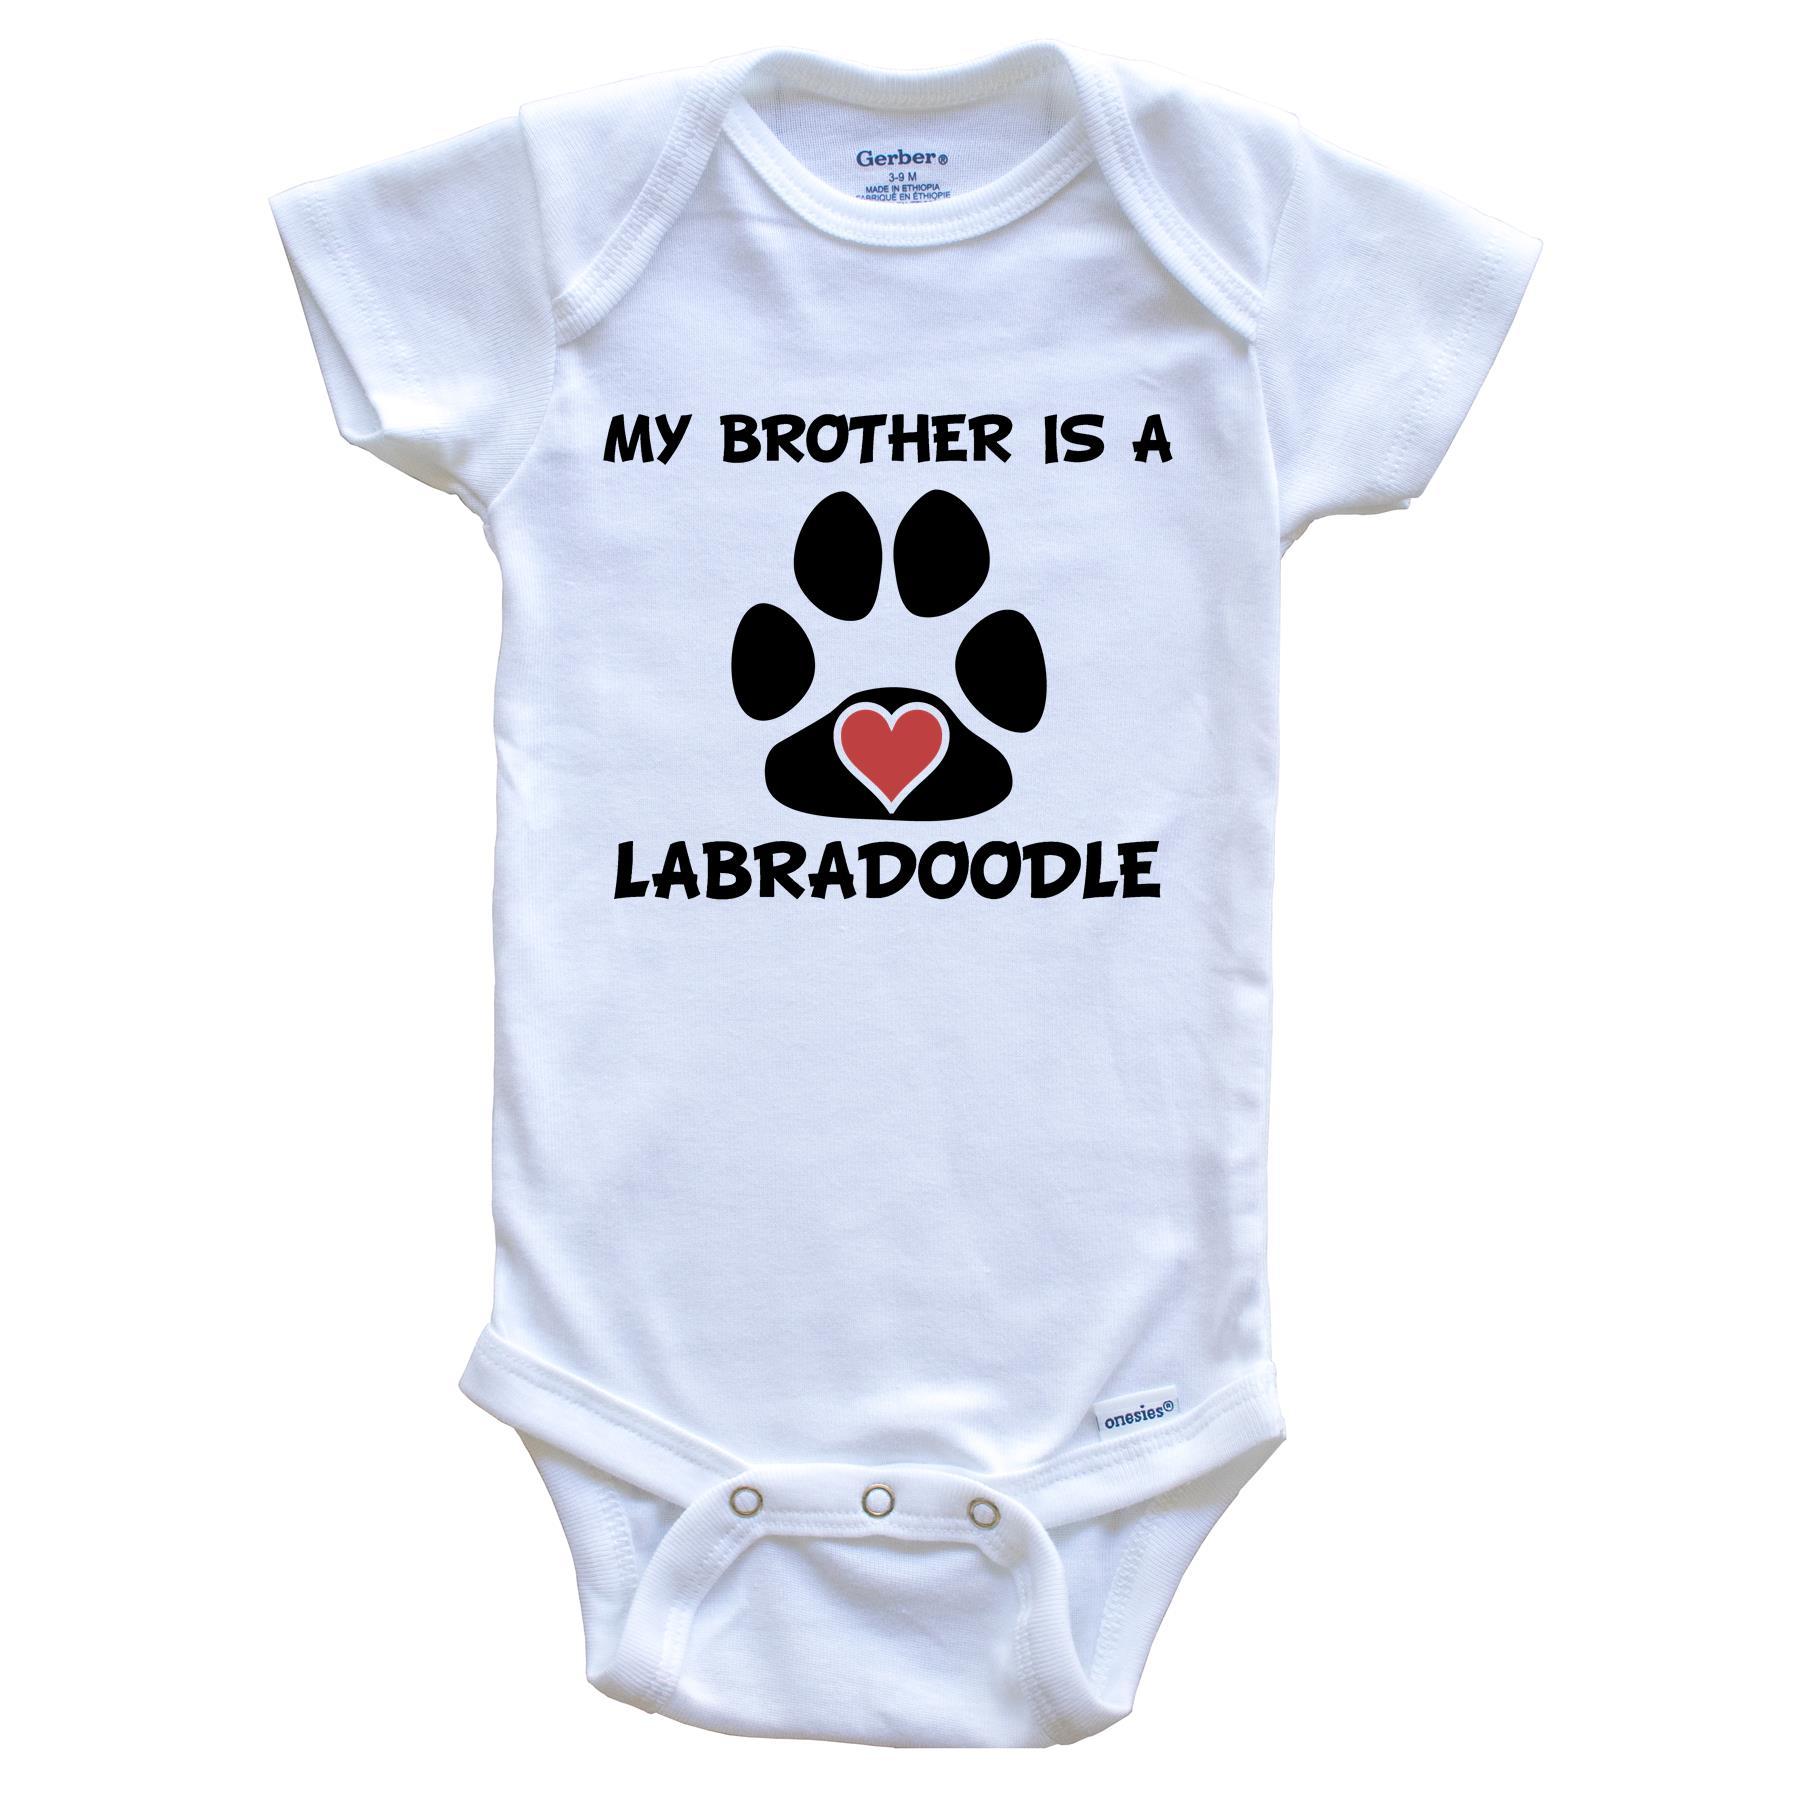 My Brother Is A Labradoodle Baby Onesie